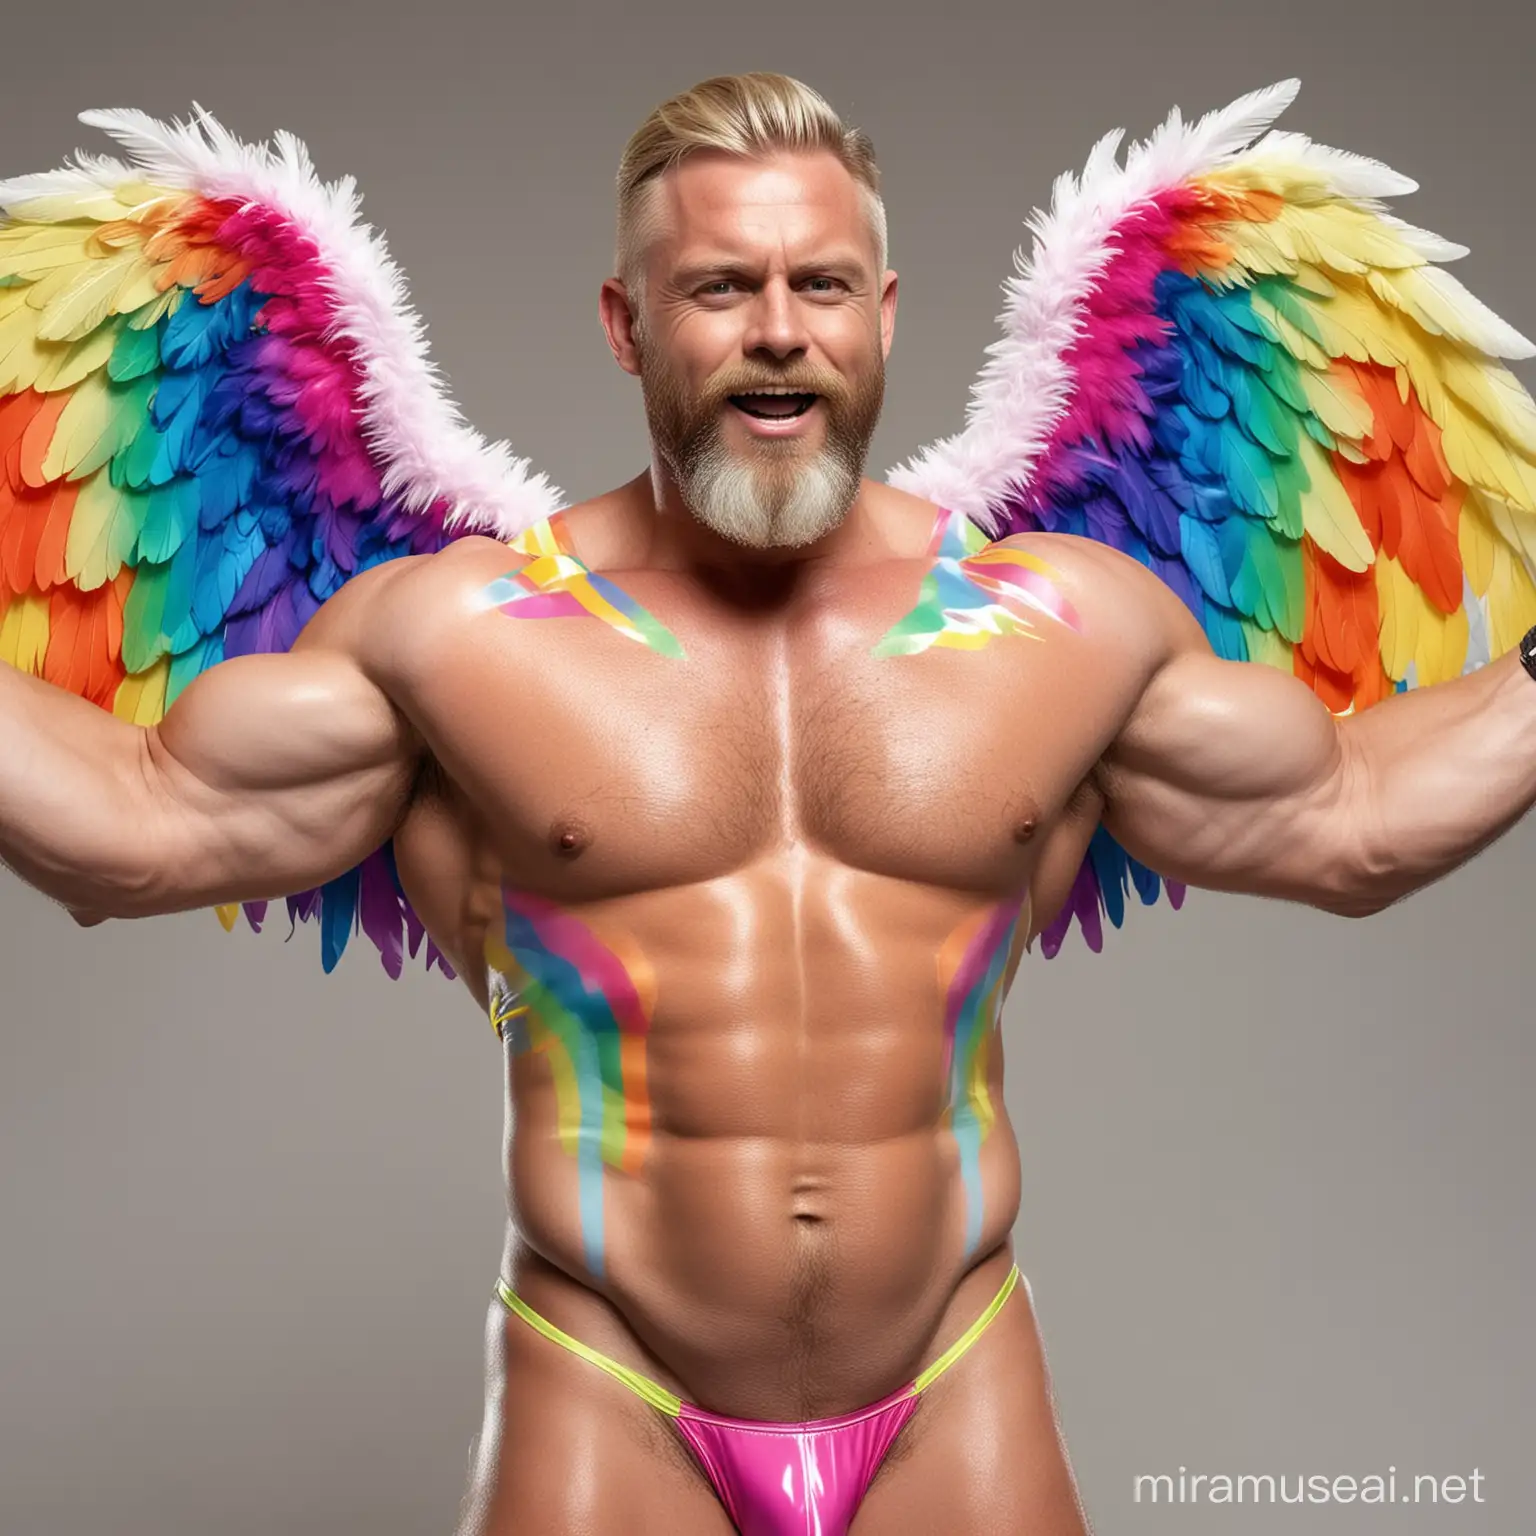 Topless 20s Thick Beefy Blond IFBB Bodybuilder Beard Daddy wearing Multi-Highlighter Bright Rainbow Coloured See Through Jacket with Eagle wings and Flexing Big Strong Arm with doraemon